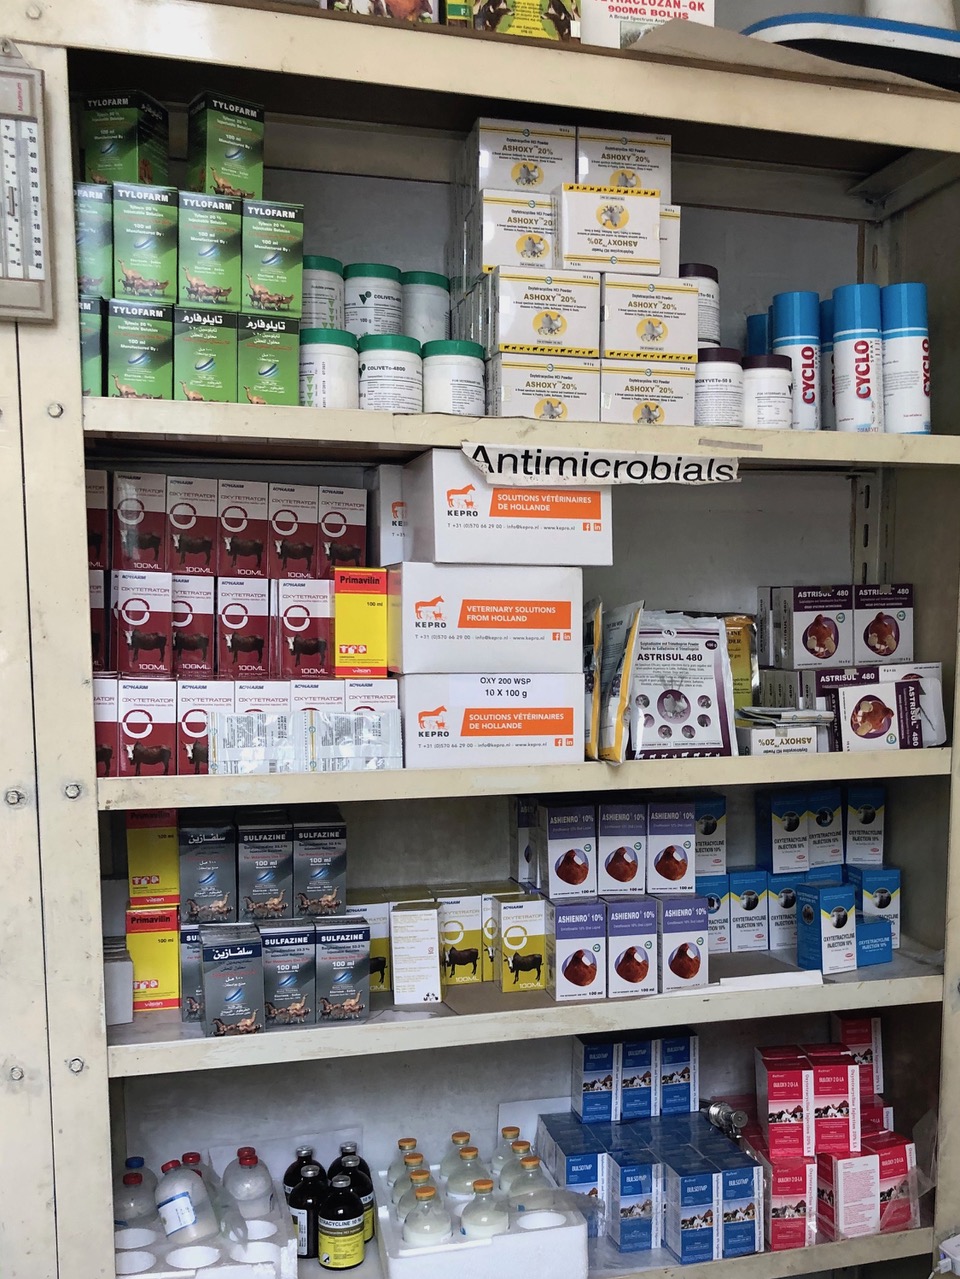 Drugs cabinet with Antimicrobials clearly labelled.